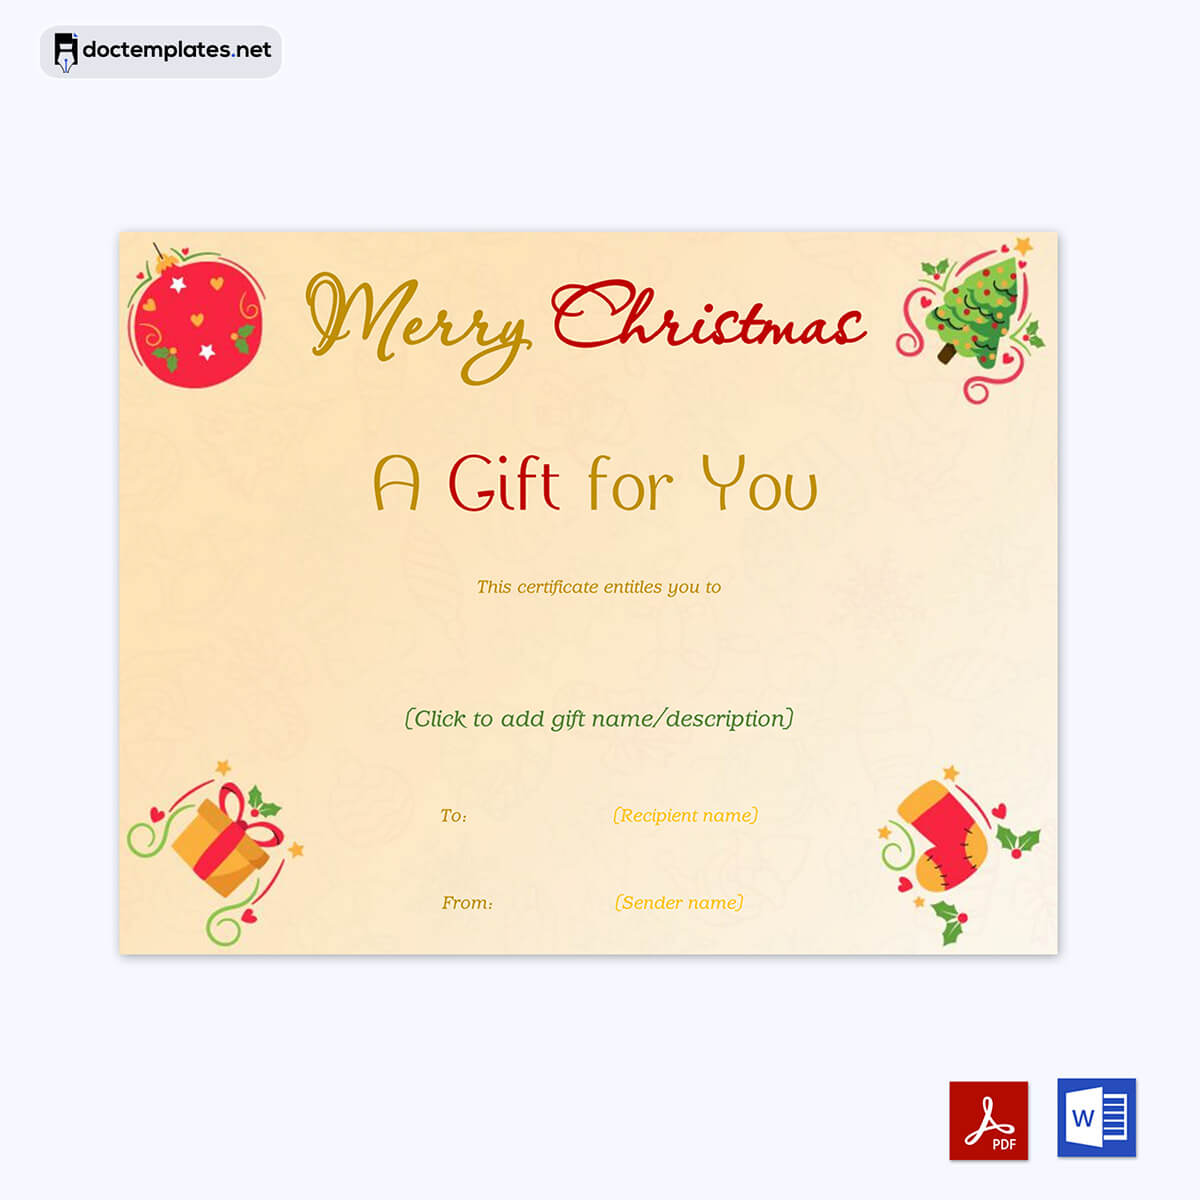 Image of Holiday Voucher Template Word
Holiday Voucher Template Word
04